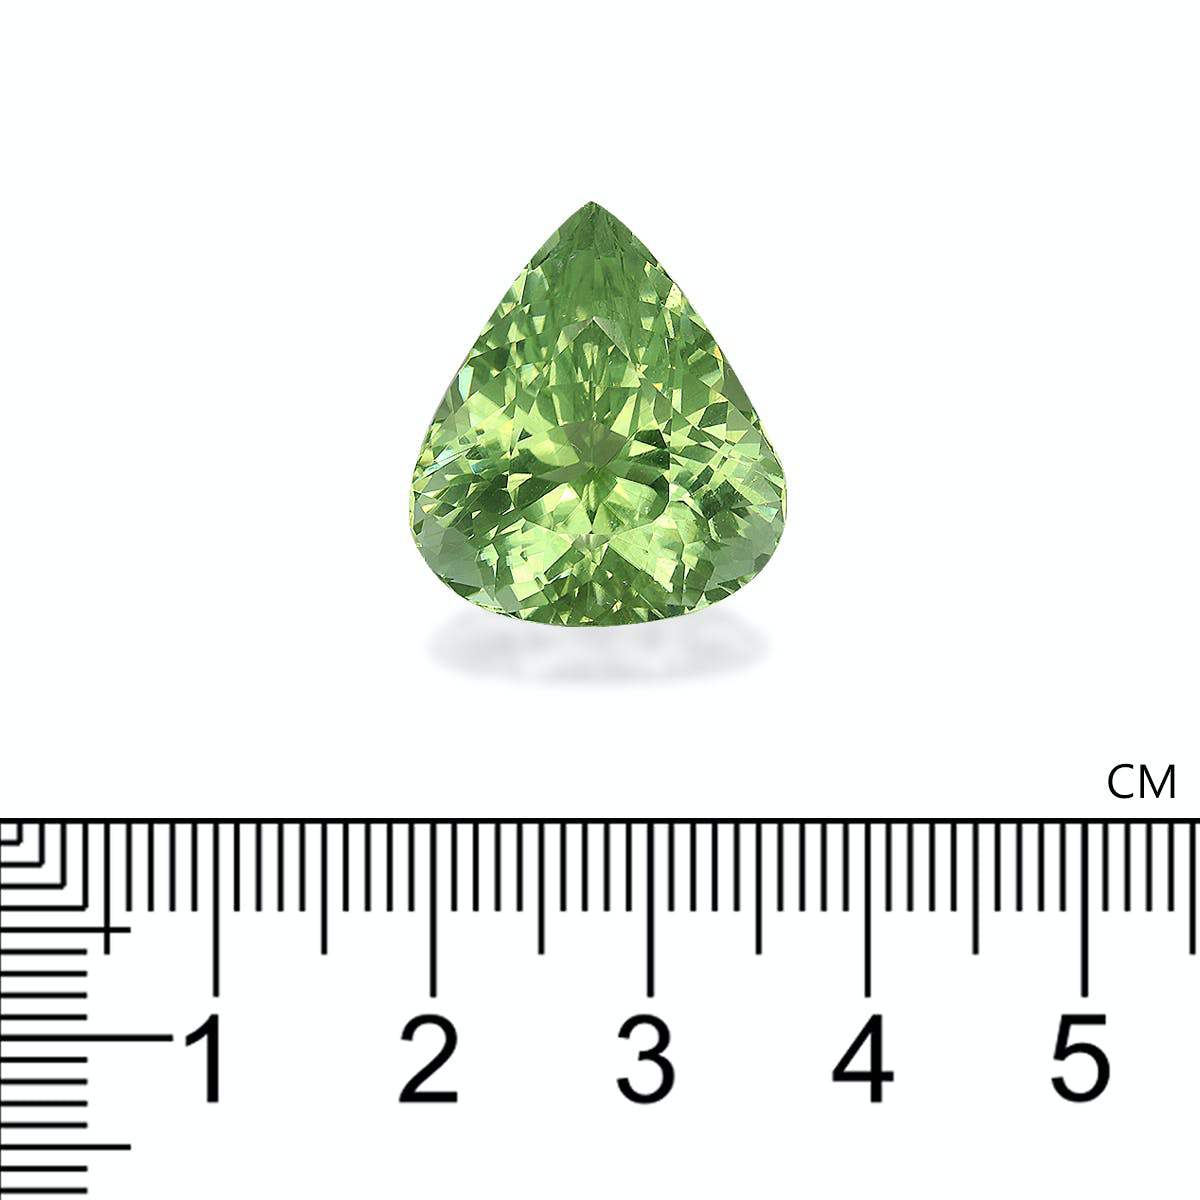 Picture of Pale Green Cuprian Tourmaline 25.07ct - 19x17mm (MZ0253)